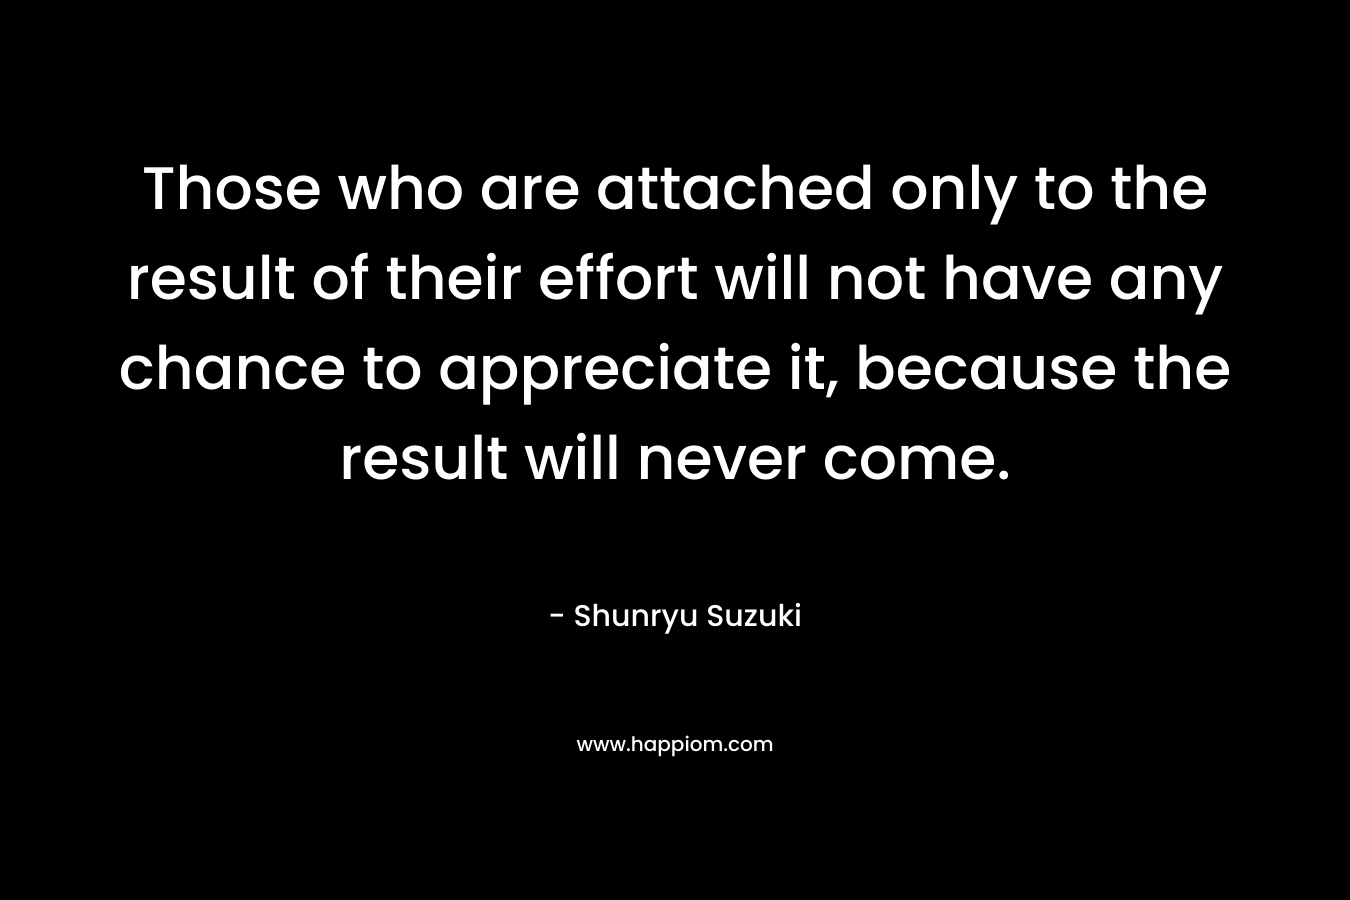 Those who are attached only to the result of their effort will not have any chance to appreciate it, because the result will never come. – Shunryu Suzuki